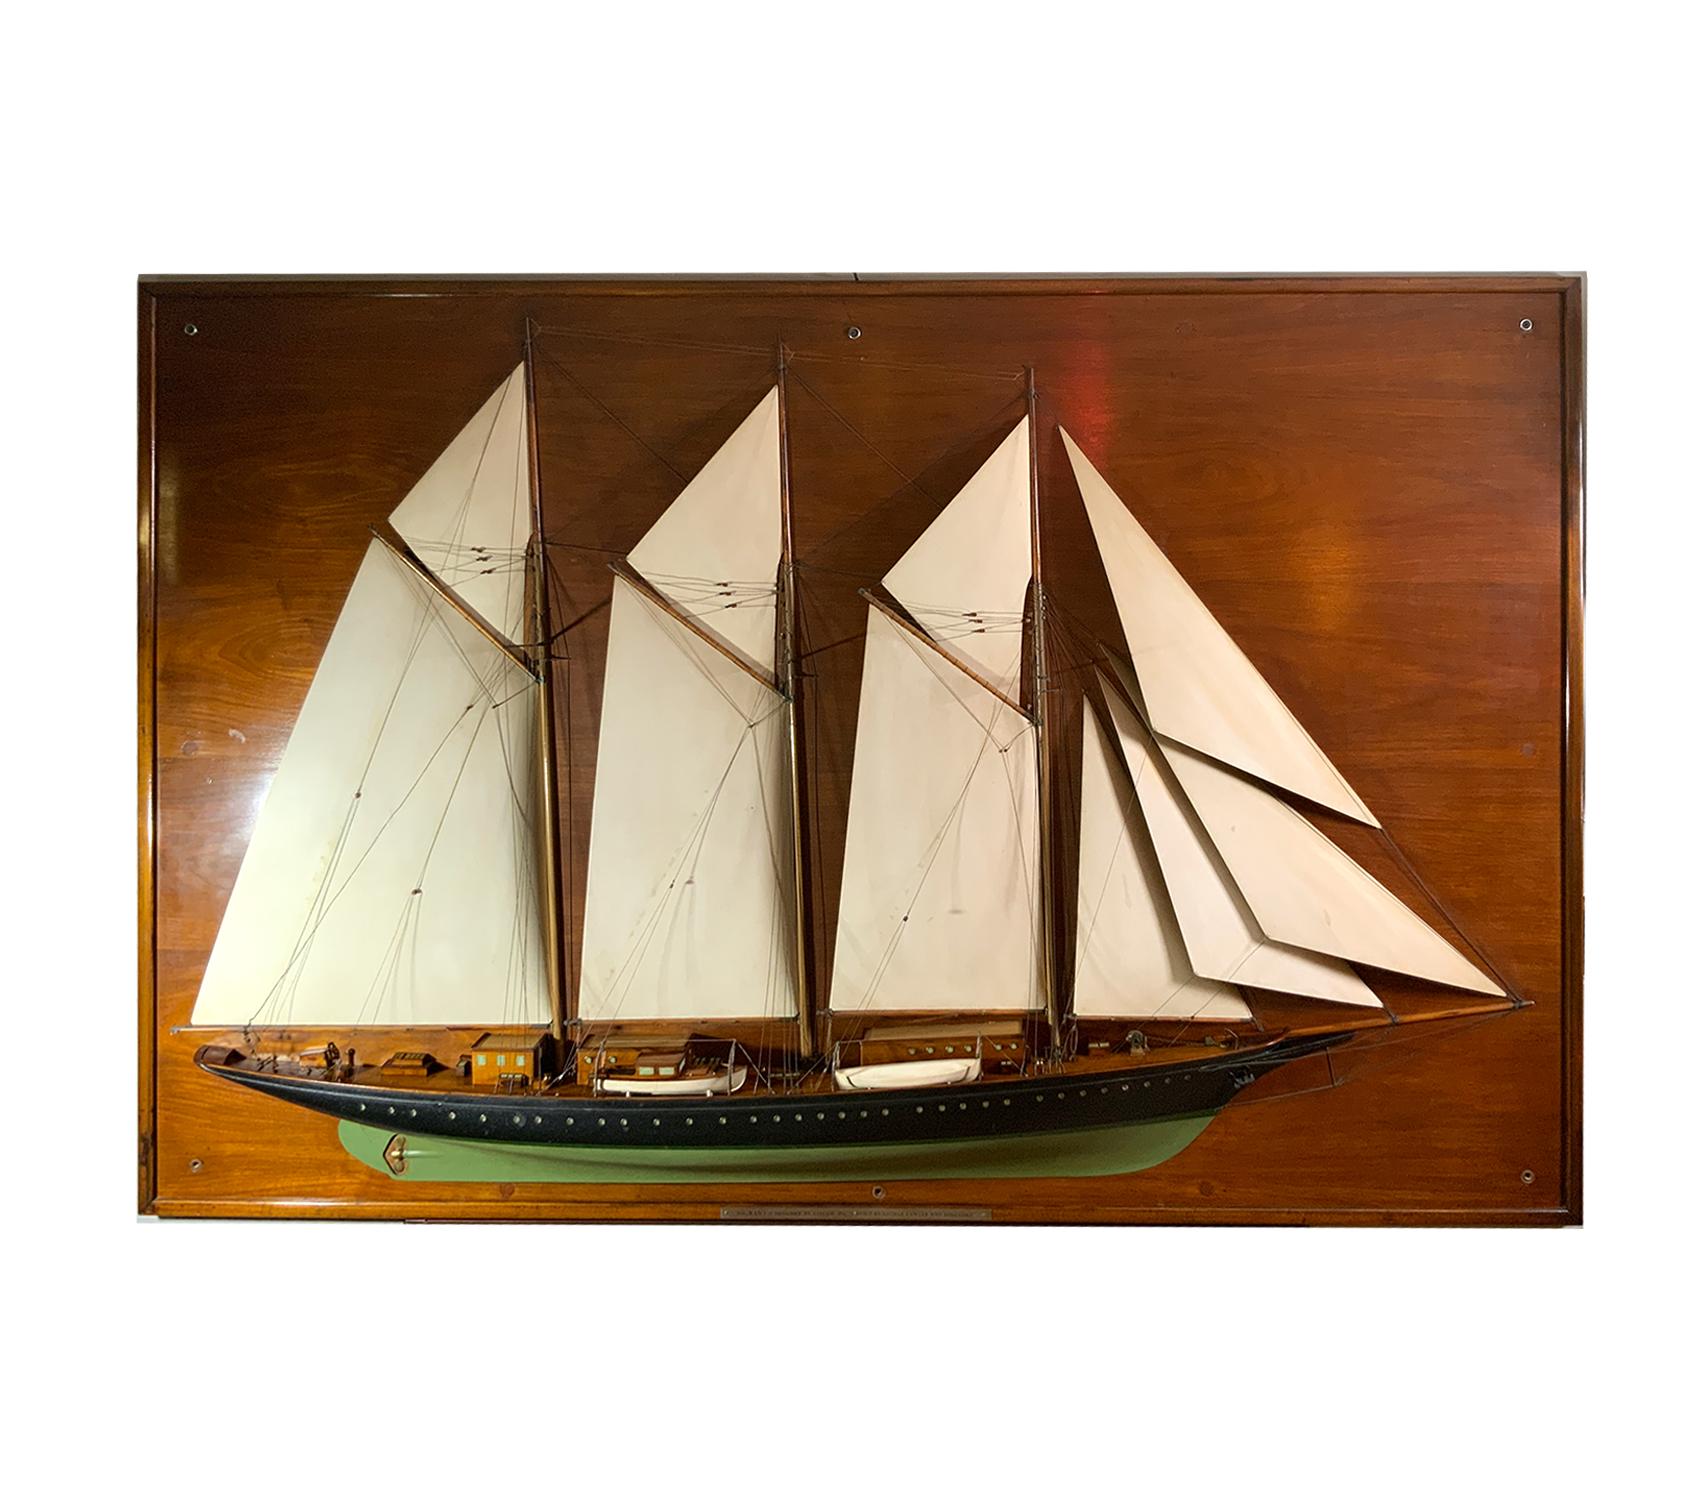 Exquisite builder’s half model of the lawley built three masted Schooner migrant. Designed by Henry Gielow migrant was the largest yacht in the world at the time and was built at a cost exceeding one million dollars. The model has incredible detail